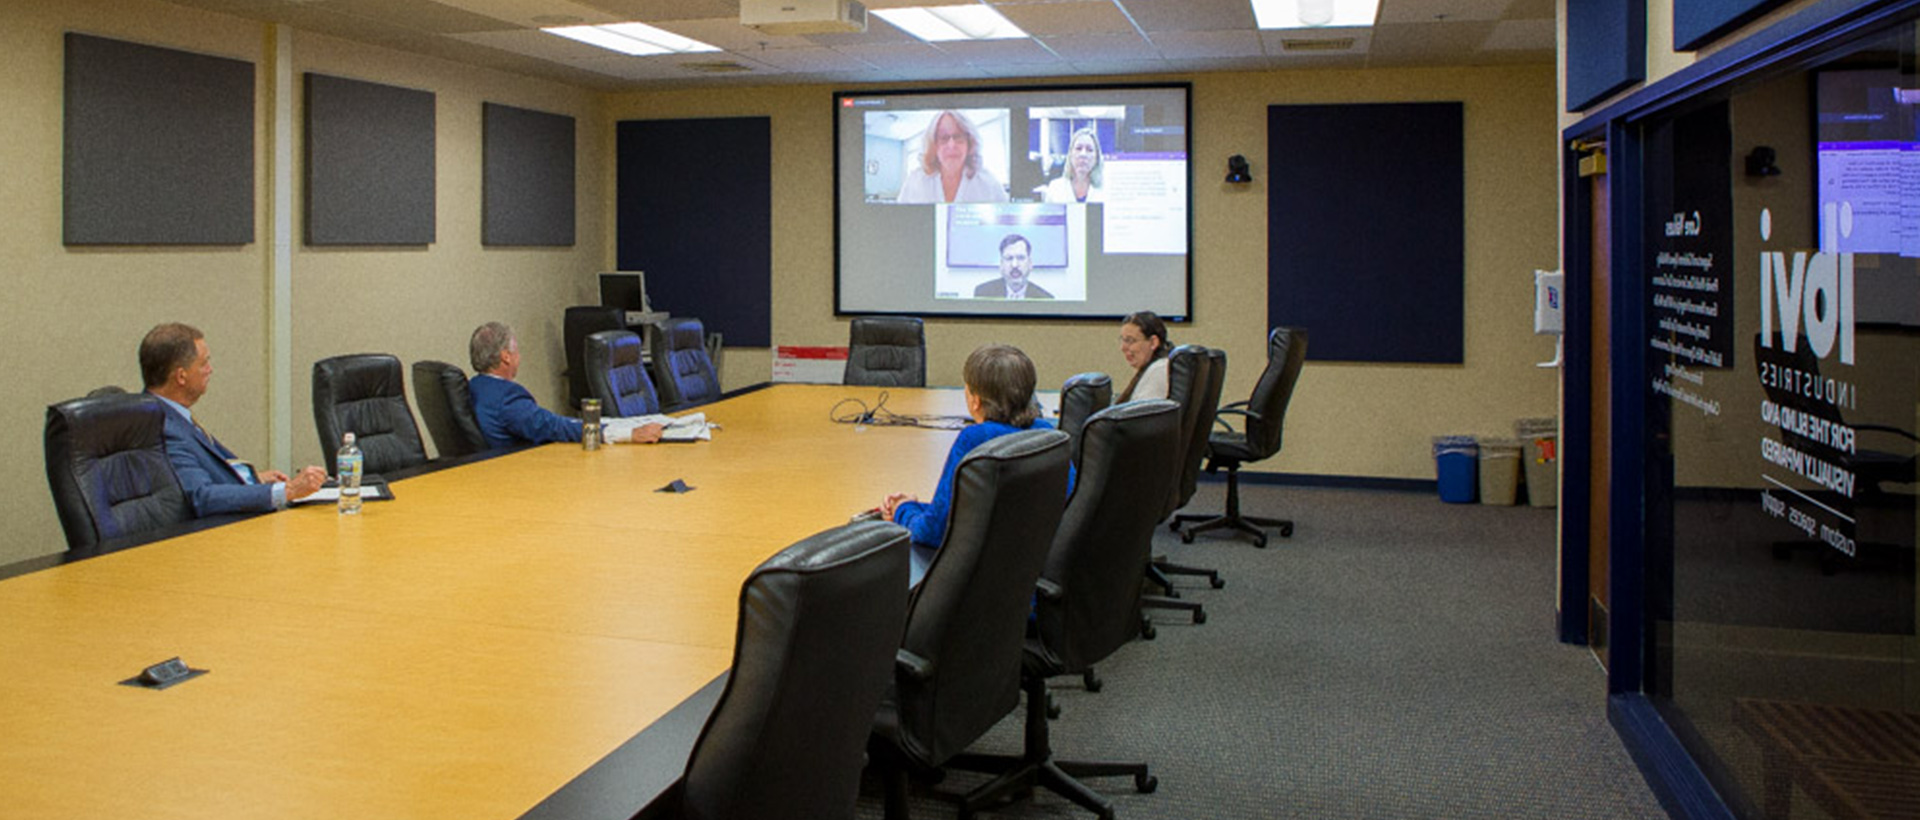 People sitting in a conference room video chatting with people on a projector screen